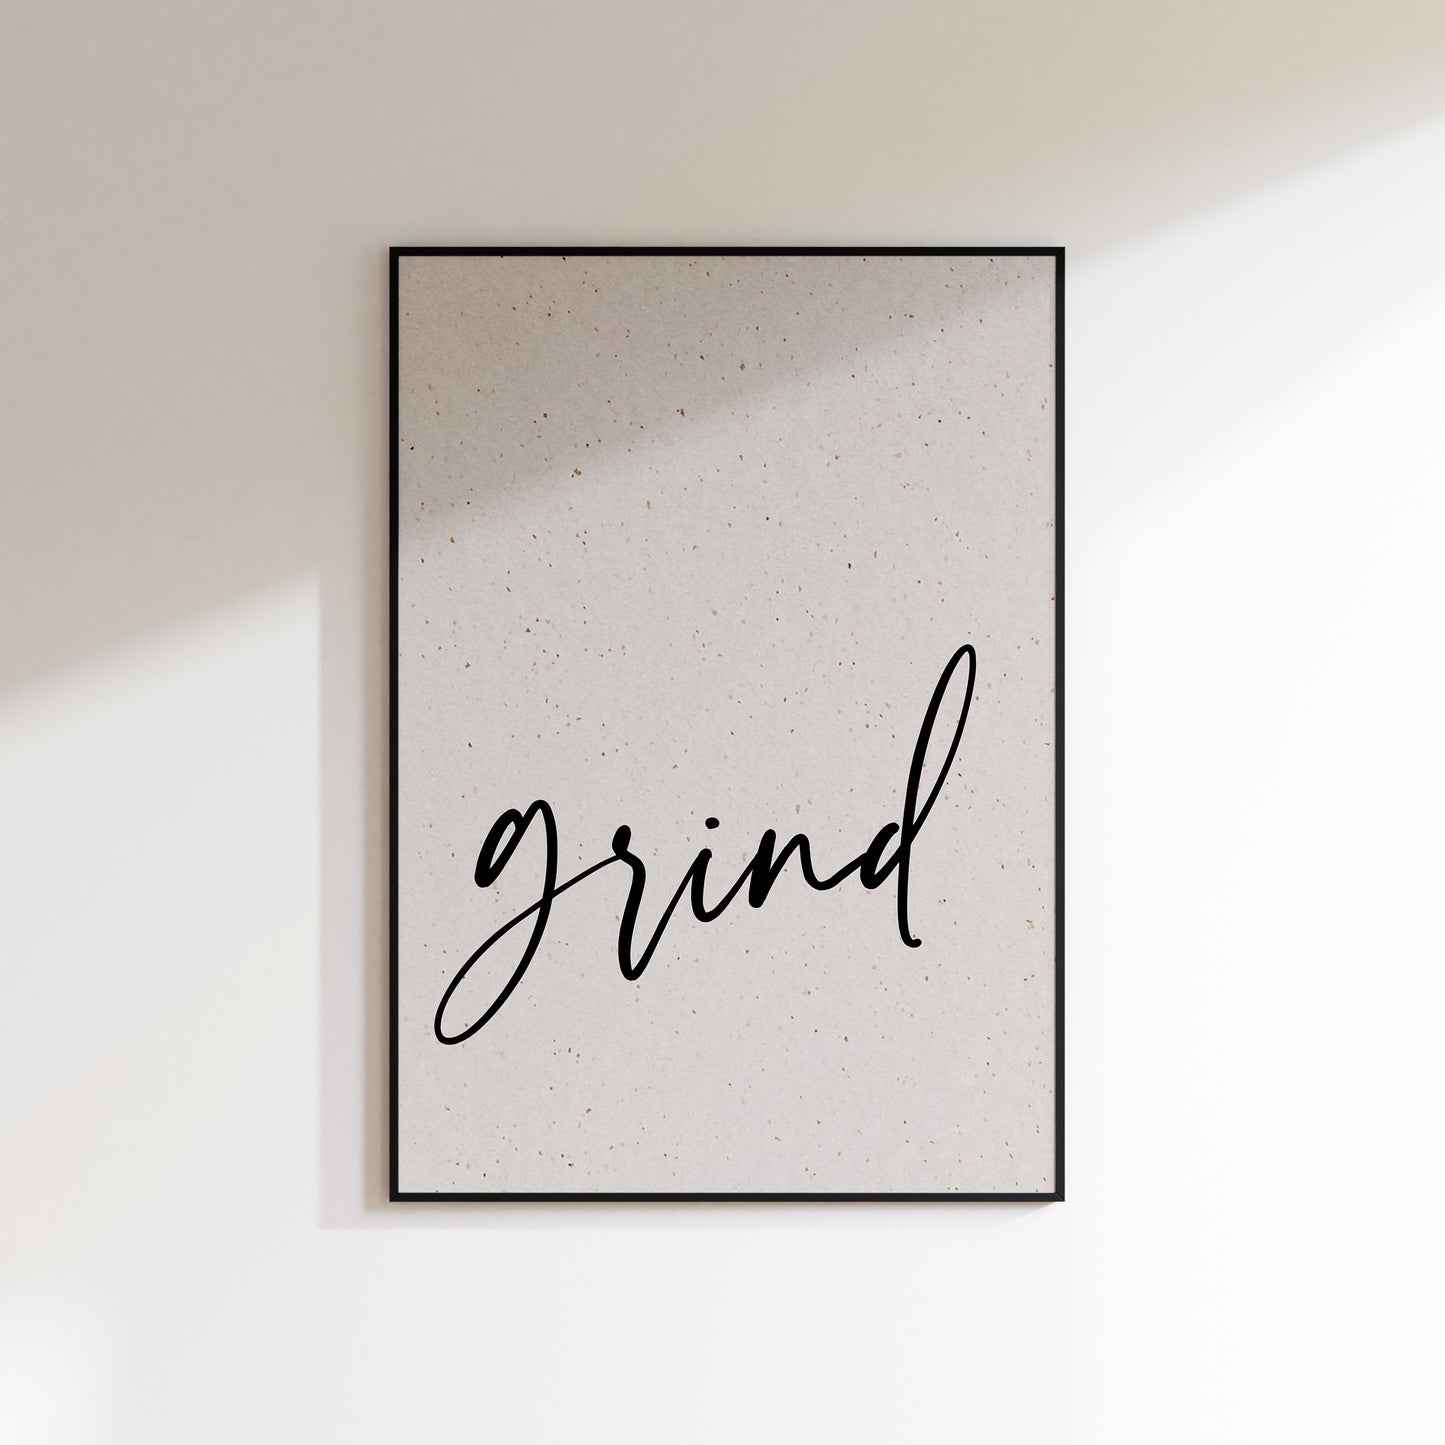 A print on textured paper with black text that reads 'grind' in a handwriting style typeface. A culinary print for the kitchen. Print is in a black frame on a white wall background.